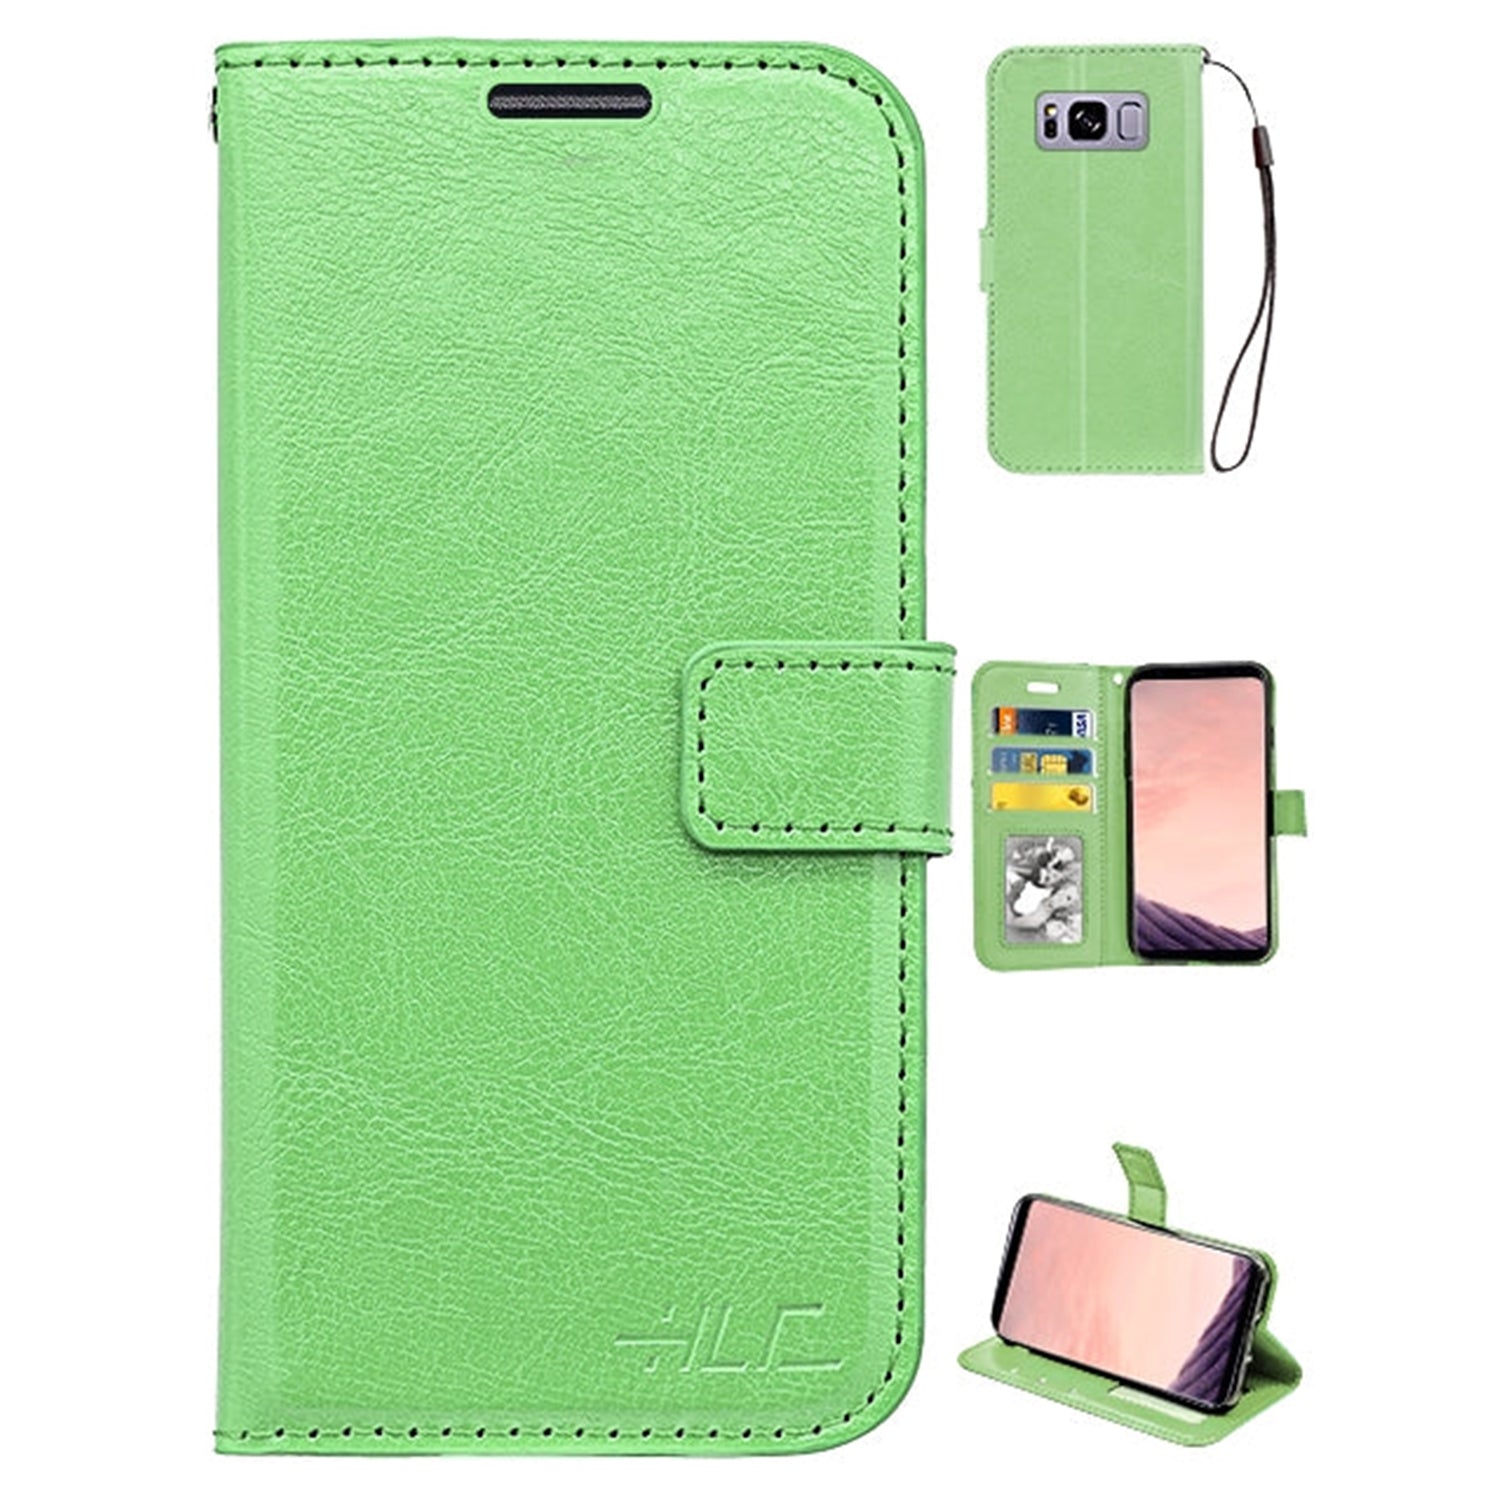 Real Plain Leather Wallet Case for Galaxy S8 Plus